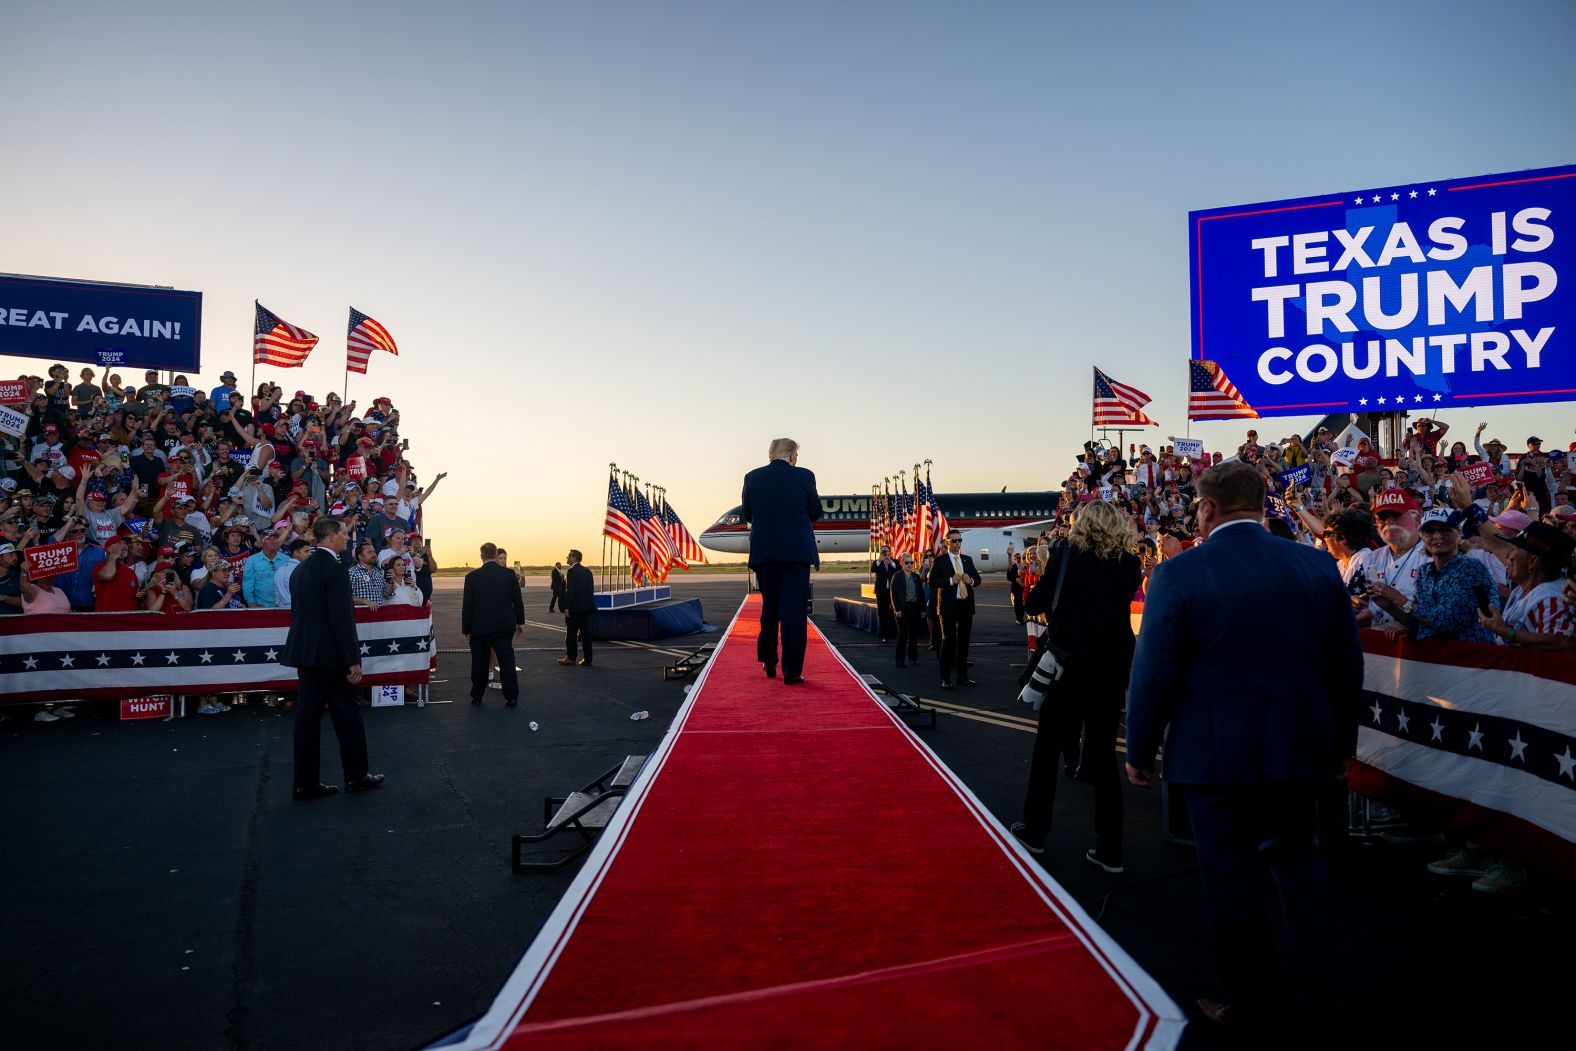 Trump leaves after speaking at his rally in Waco on March 25, 2023. Trump, who is running for president again, <a href="https://www.cnn.com/2023/03/25/politics/texas-trump-2024-rally/index.html" target="_blank">railed against what he called "prosecutorial misconduct"</a> and denied any wrongdoing amid investigations in New York, Georgia and Washington, DC.